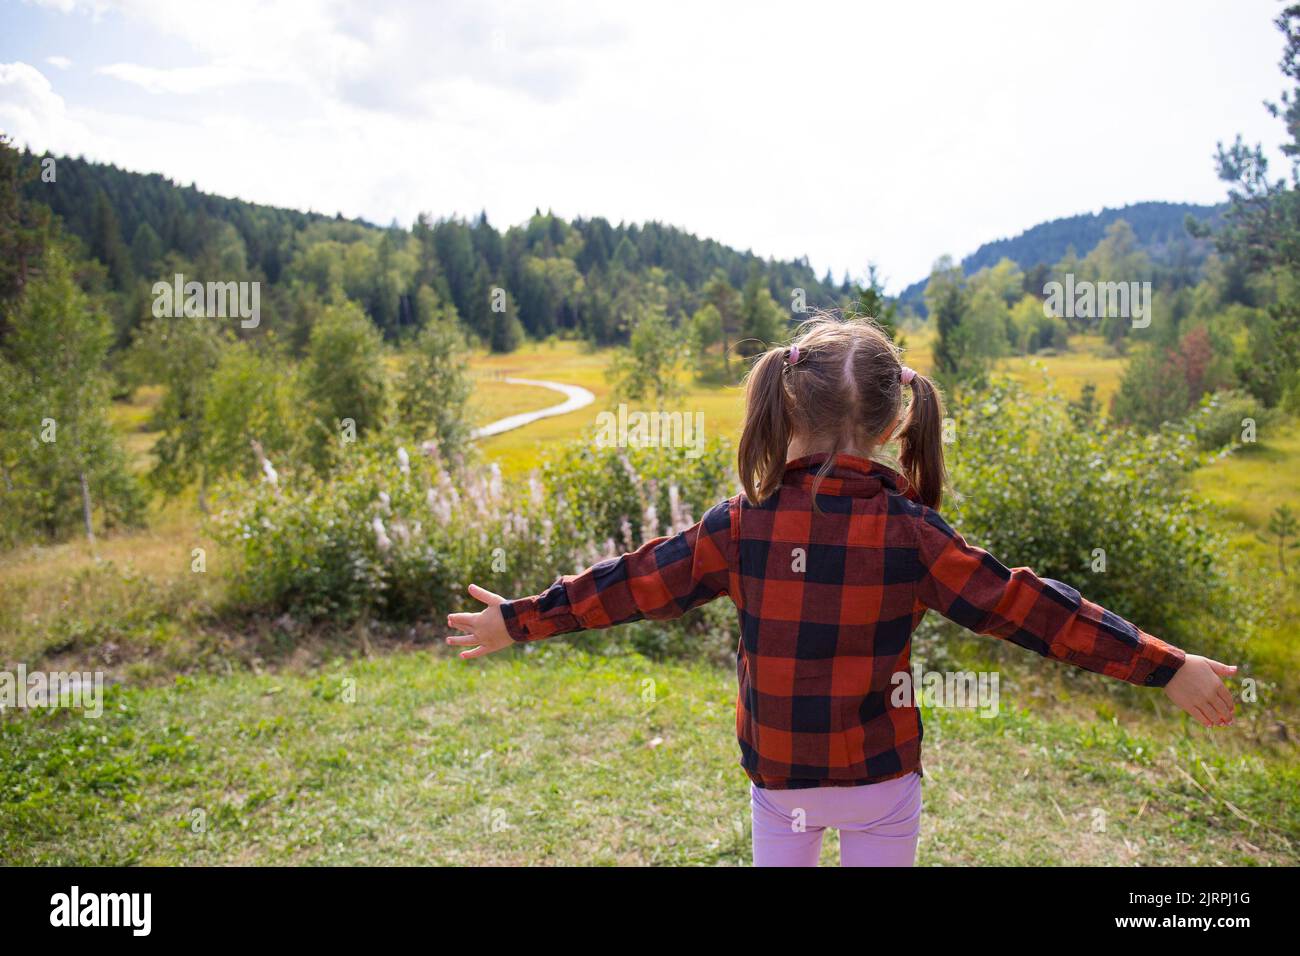 Caucasian child girl, back view, with open arms in a natural mountain landscape on a sunny day. Pian di Gembro natural park, Valtellina, Italy. Stock Photo